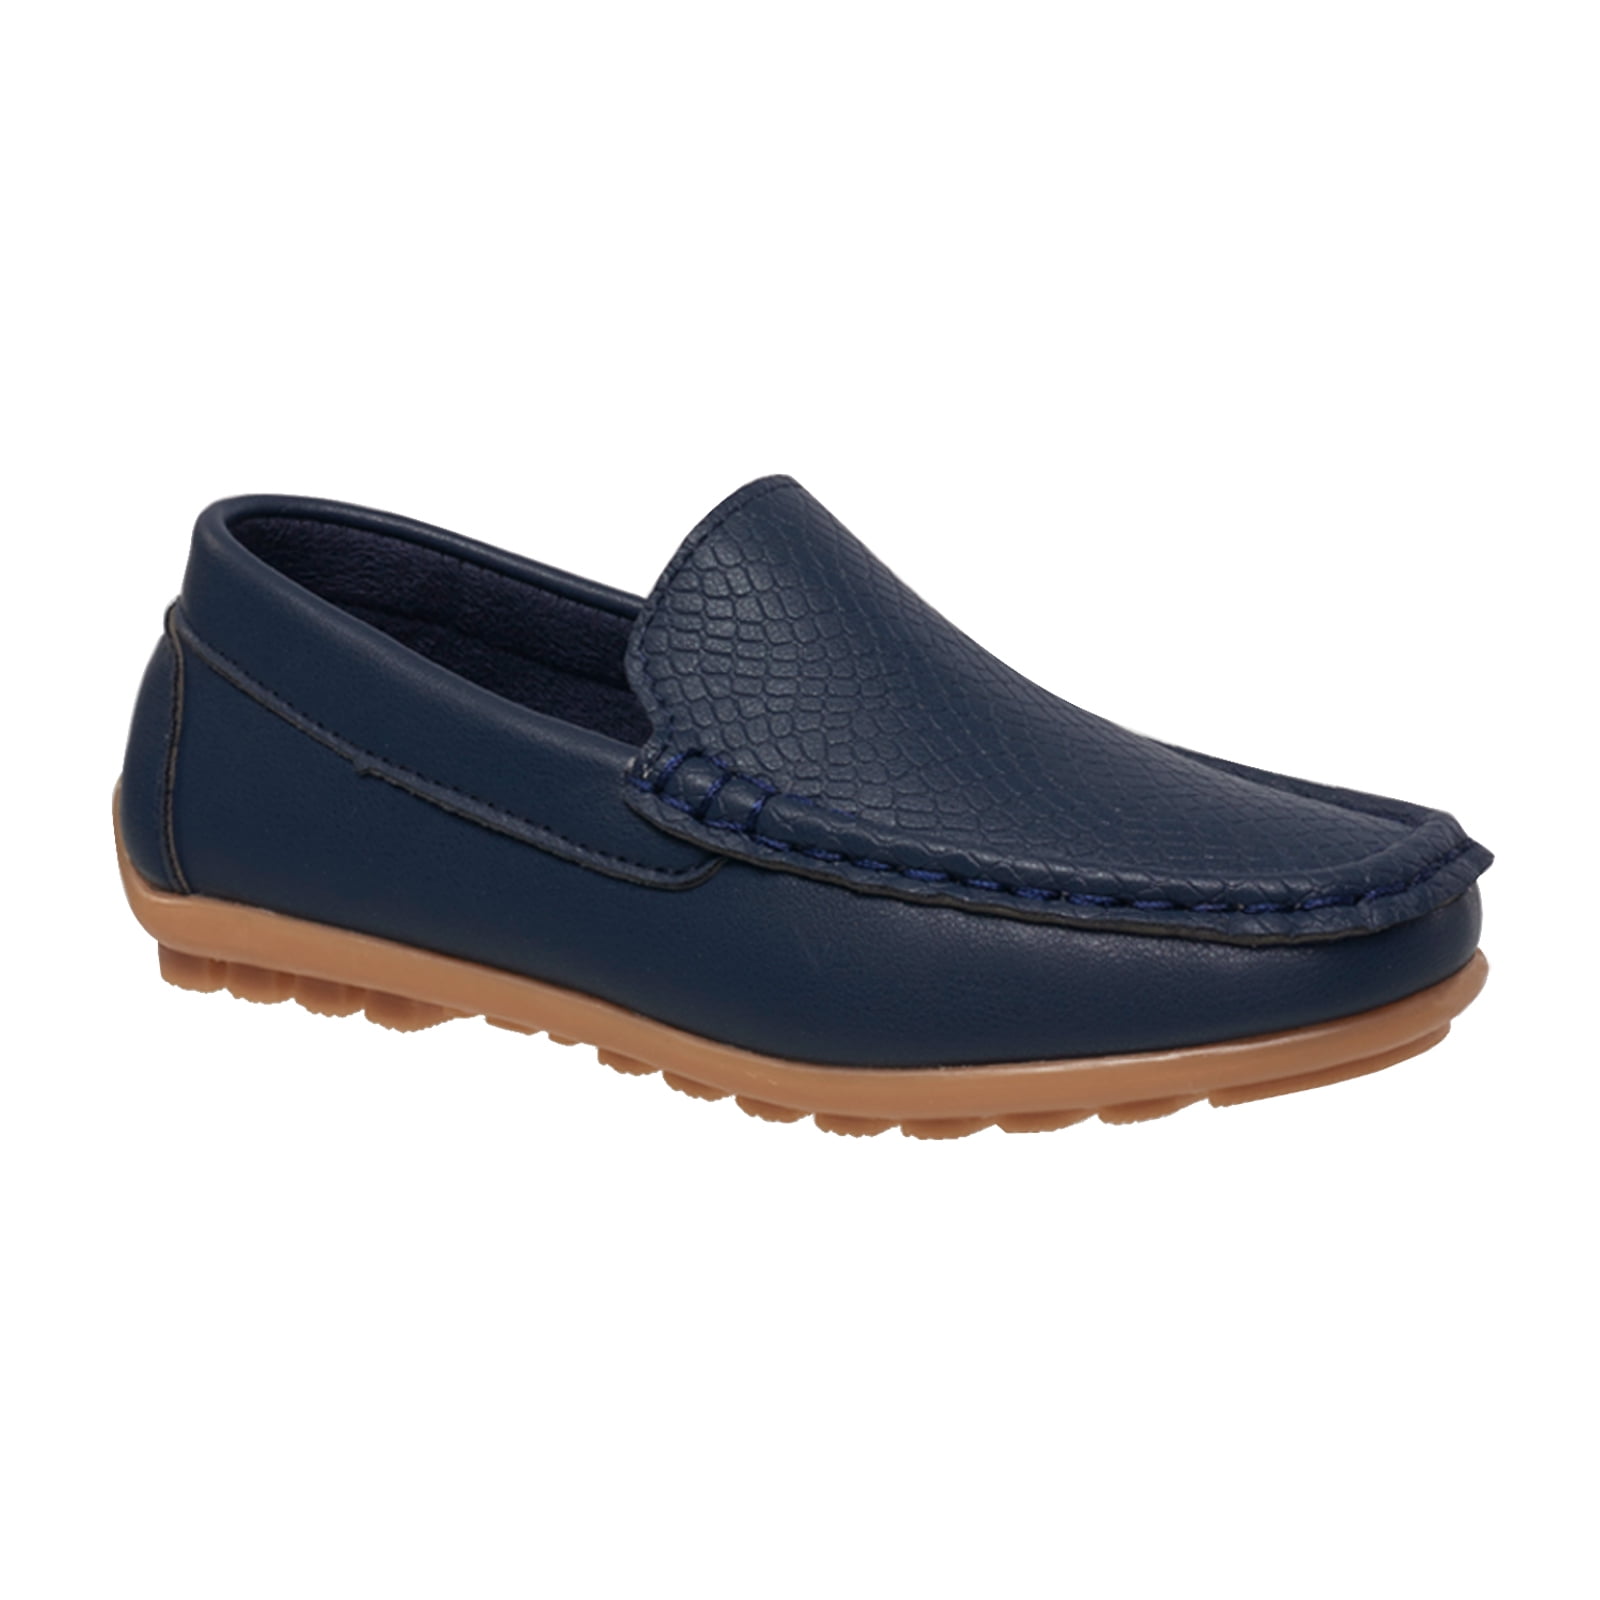 coXist Kids Toddlers Boys Girls Leather Slip On Loafers Moccasin Boat Dress Shoes 